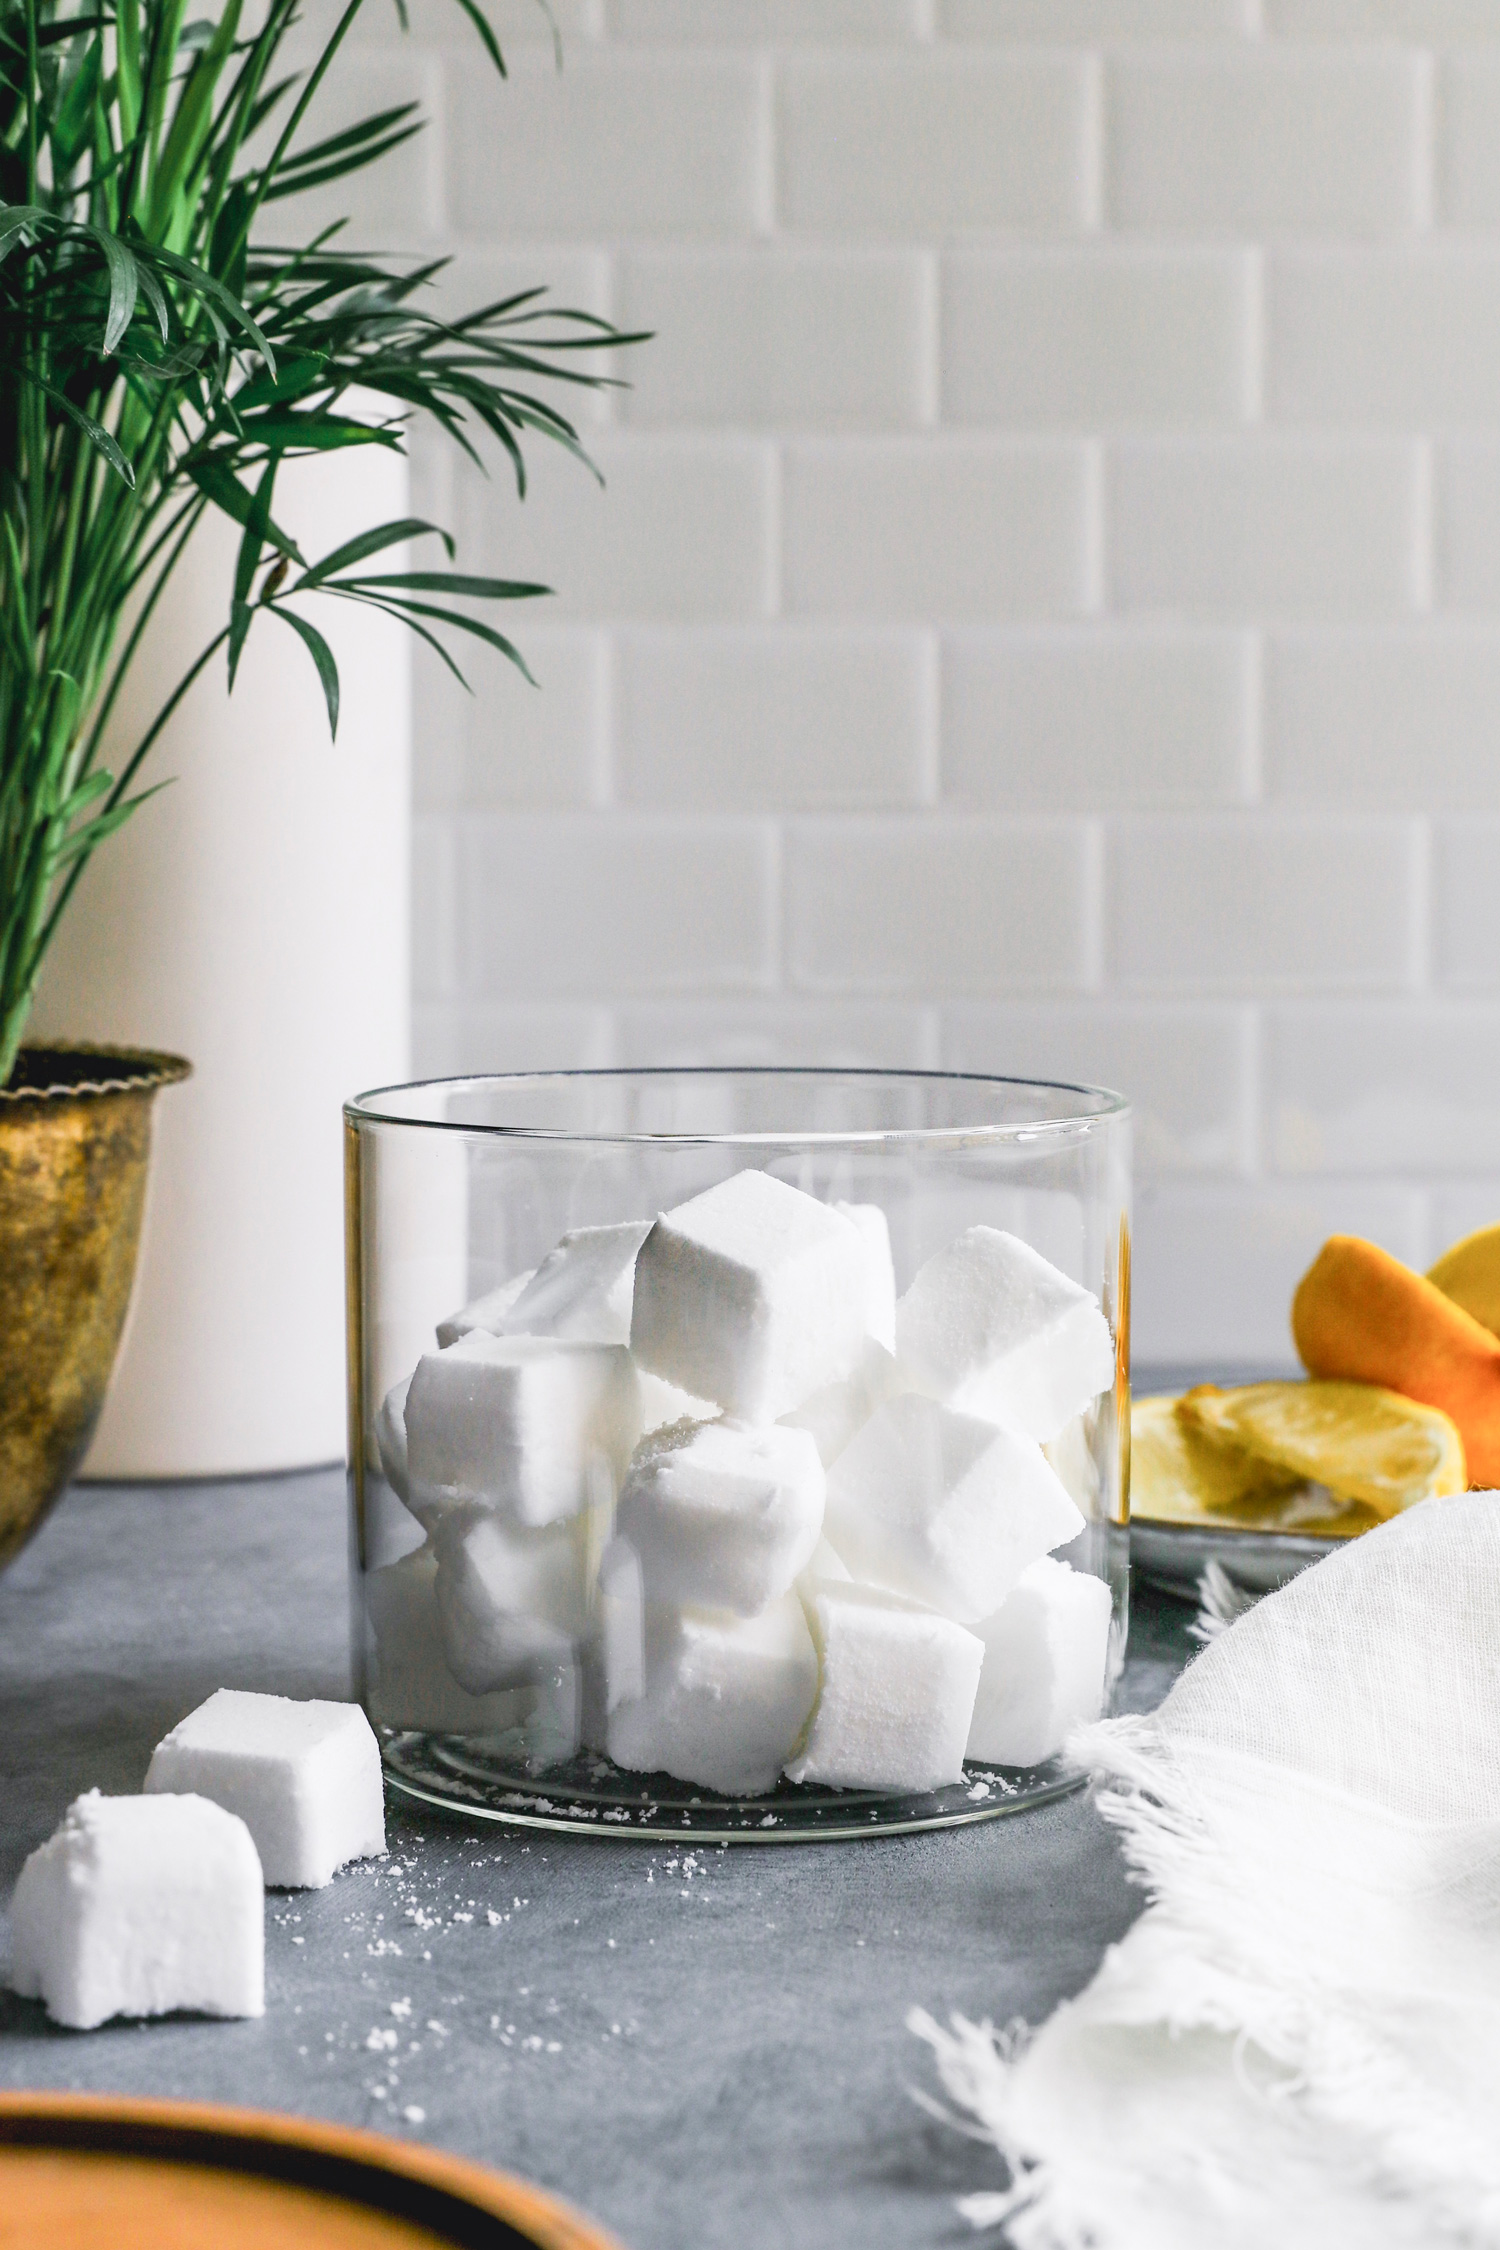 Hate doing dishes? We do too. Do them in record time with these DIY dishwasher pods made with non-toxic ingredients you probably already have!